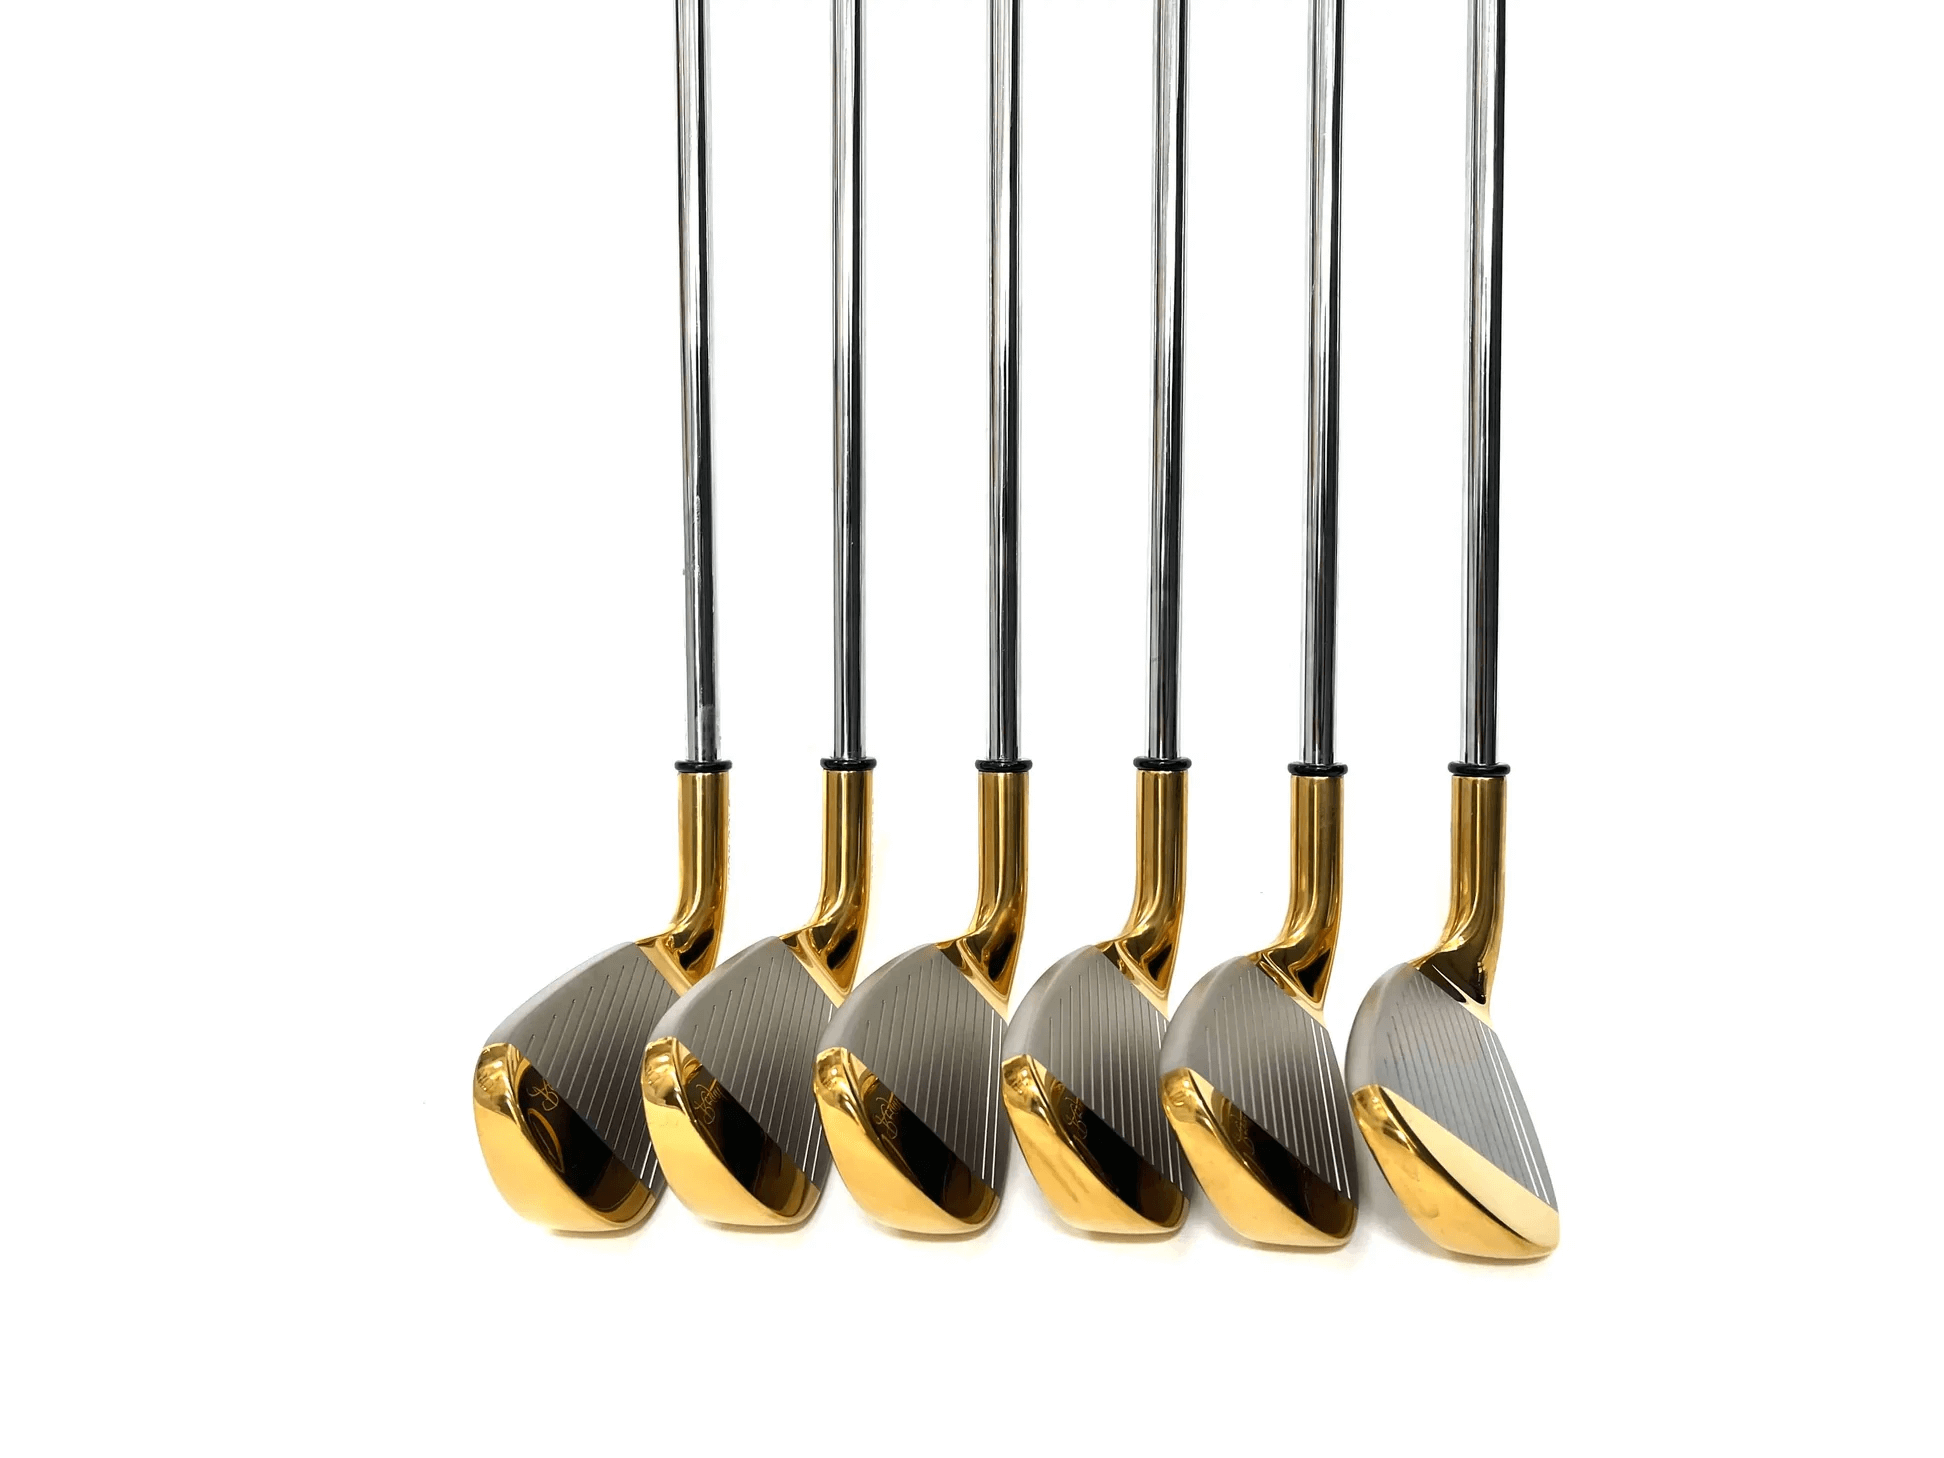 Single Length Irons from One Iron Golf